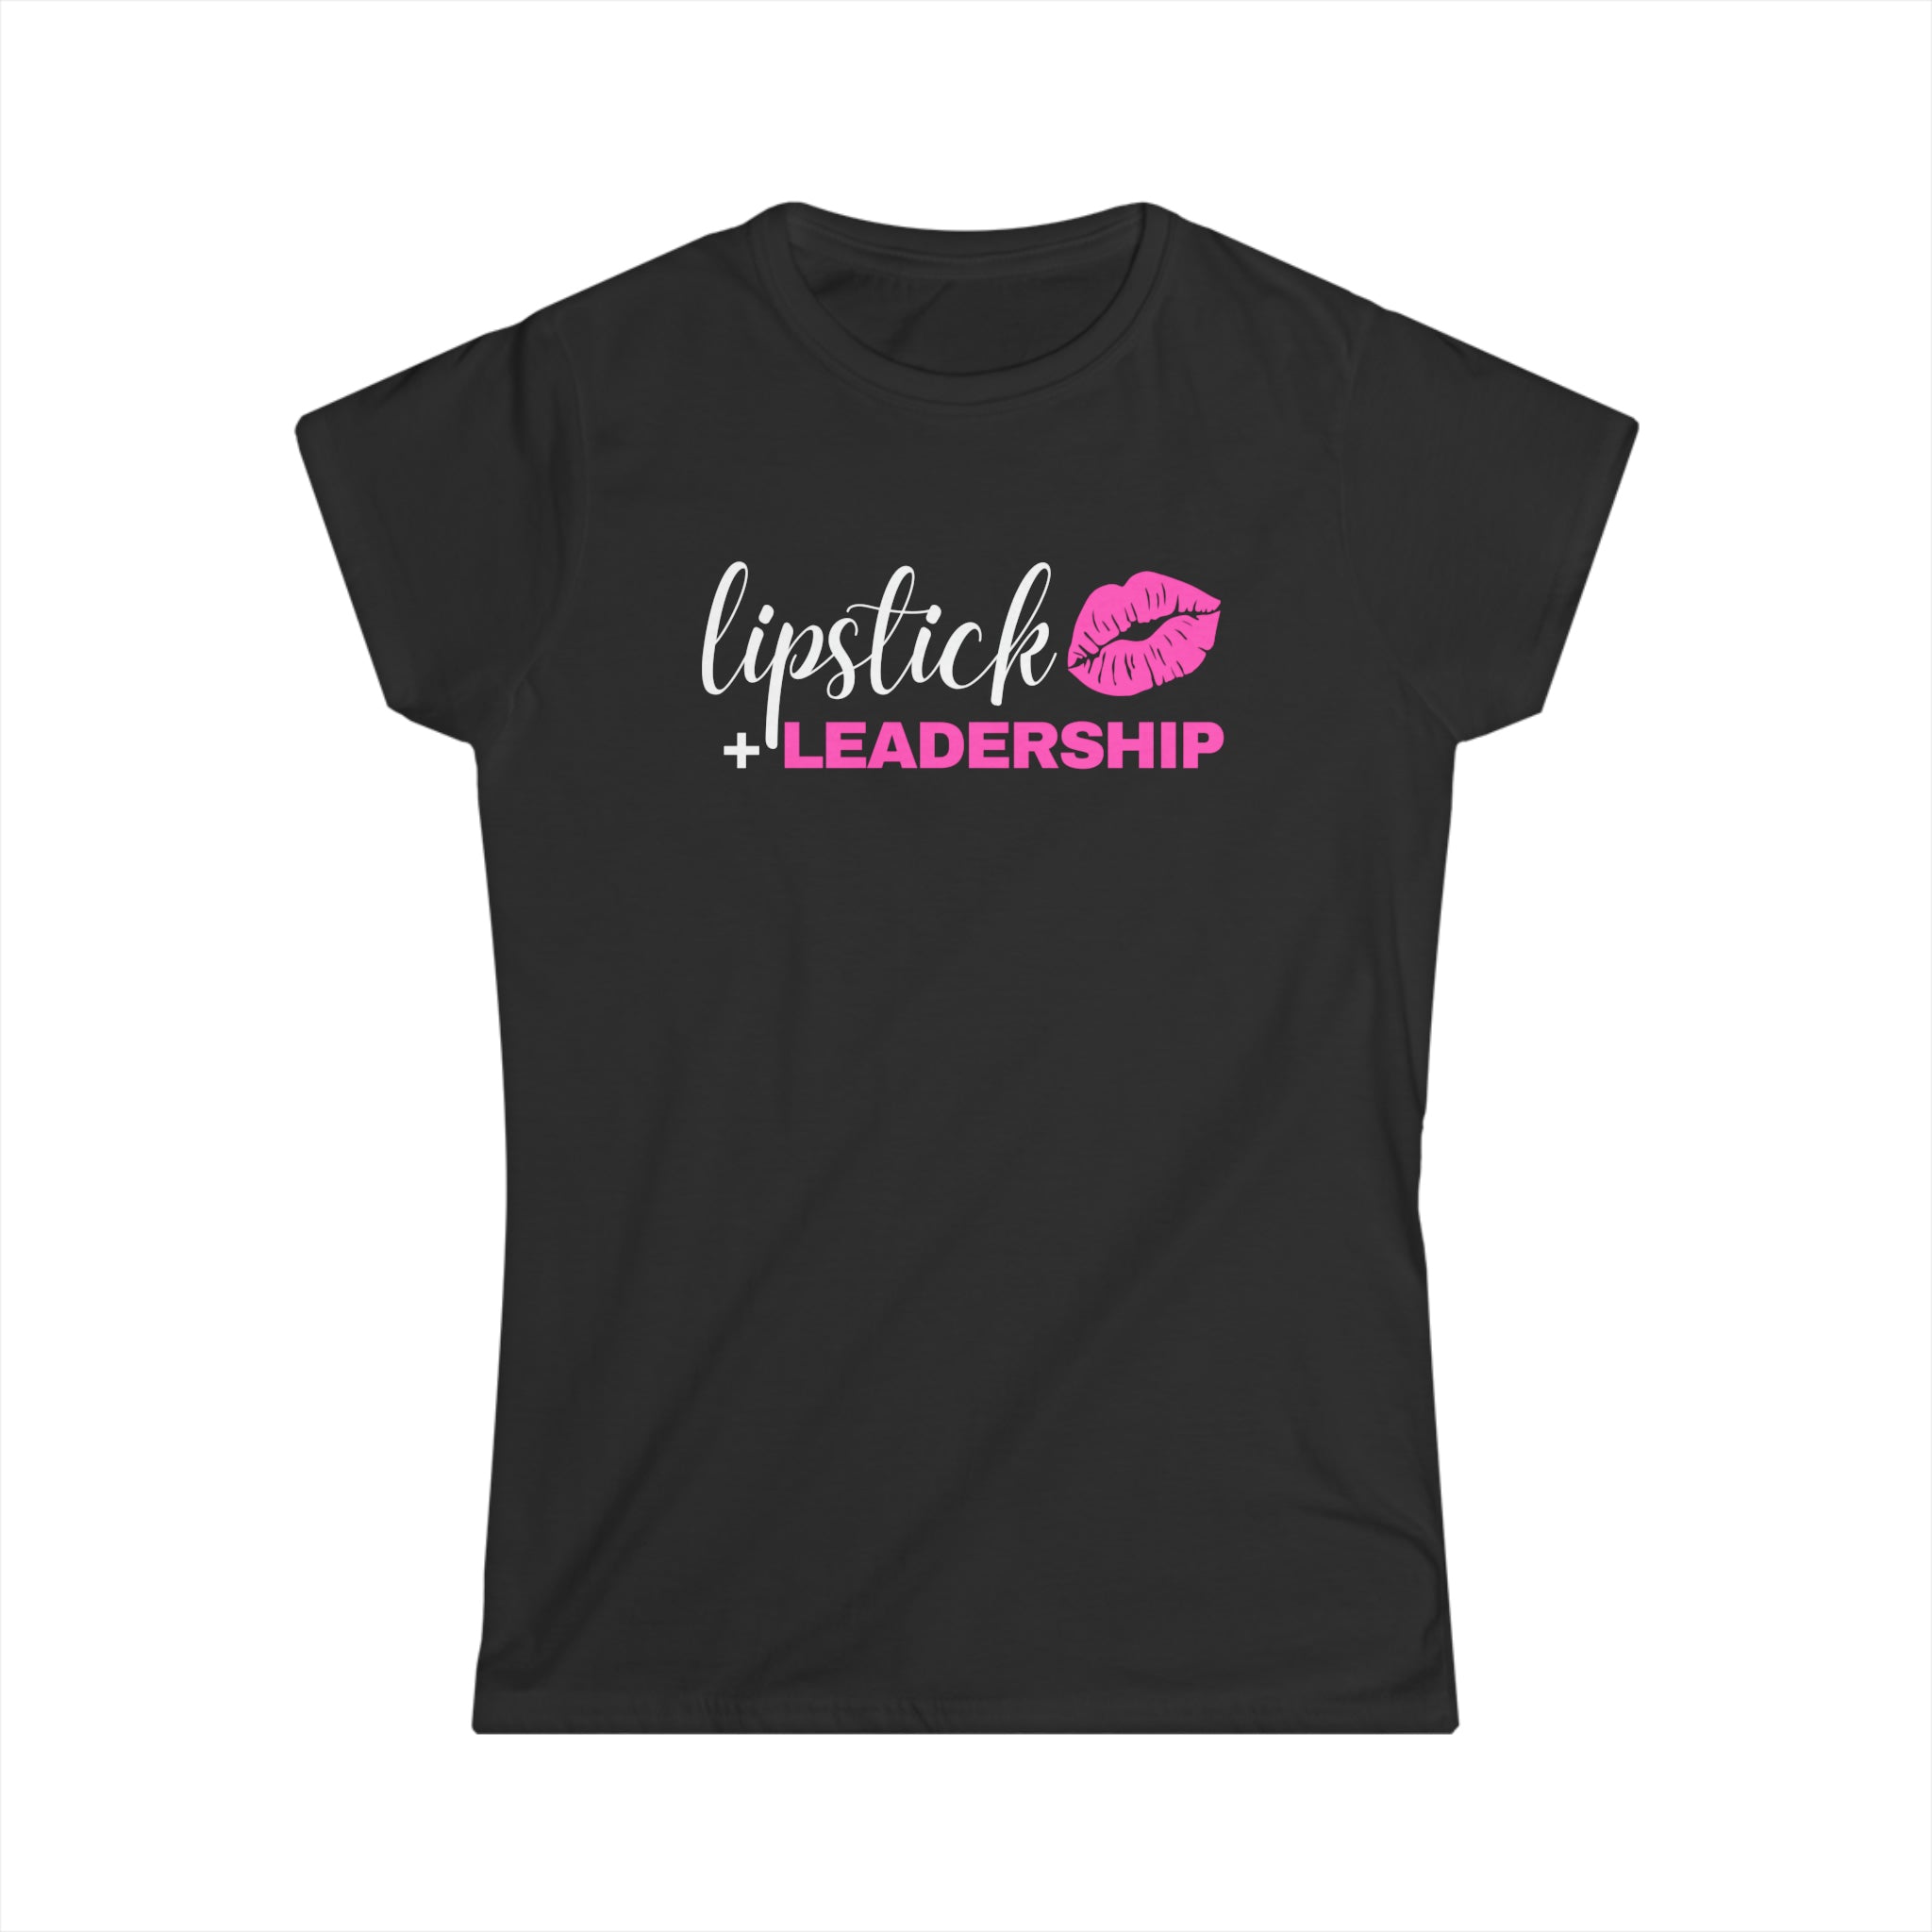 Lipstick + Leadership (Pink Lips) Women's Softstyle Tee, Makeup Tshirt, Beauty Business Tshirt T-Shirt Black-2XL The Middle Aged Groove